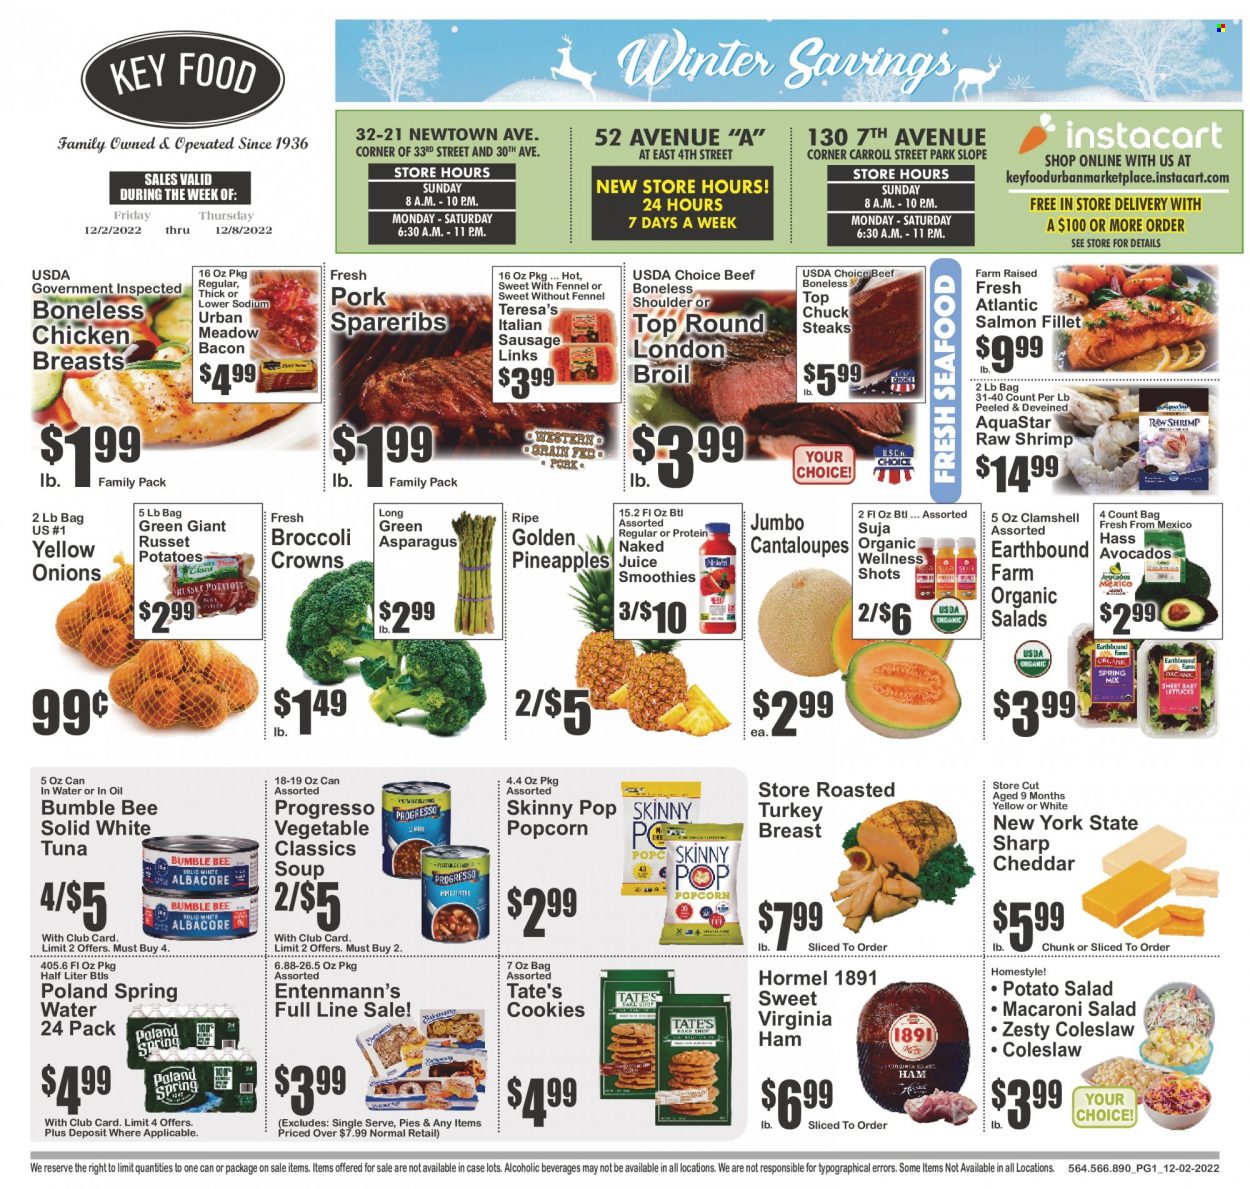 thumbnail - Key Food Flyer - 12/02/2022 - 12/08/2022 - Sales products - Entenmann's, asparagus, cantaloupe, russet potatoes, potatoes, salad, avocado, pineapple, salmon, salmon fillet, tuna, seafood, shrimps, coleslaw, soup, Bumble Bee, Progresso, Hormel, bacon, ham, virginia ham, sausage, italian sausage, potato salad, macaroni salad, cheddar, cheese, cookies, popcorn, Skinny Pop, fennel, juice, smoothie, spring water, chicken breasts, steak, pork spare ribs. Page 1.